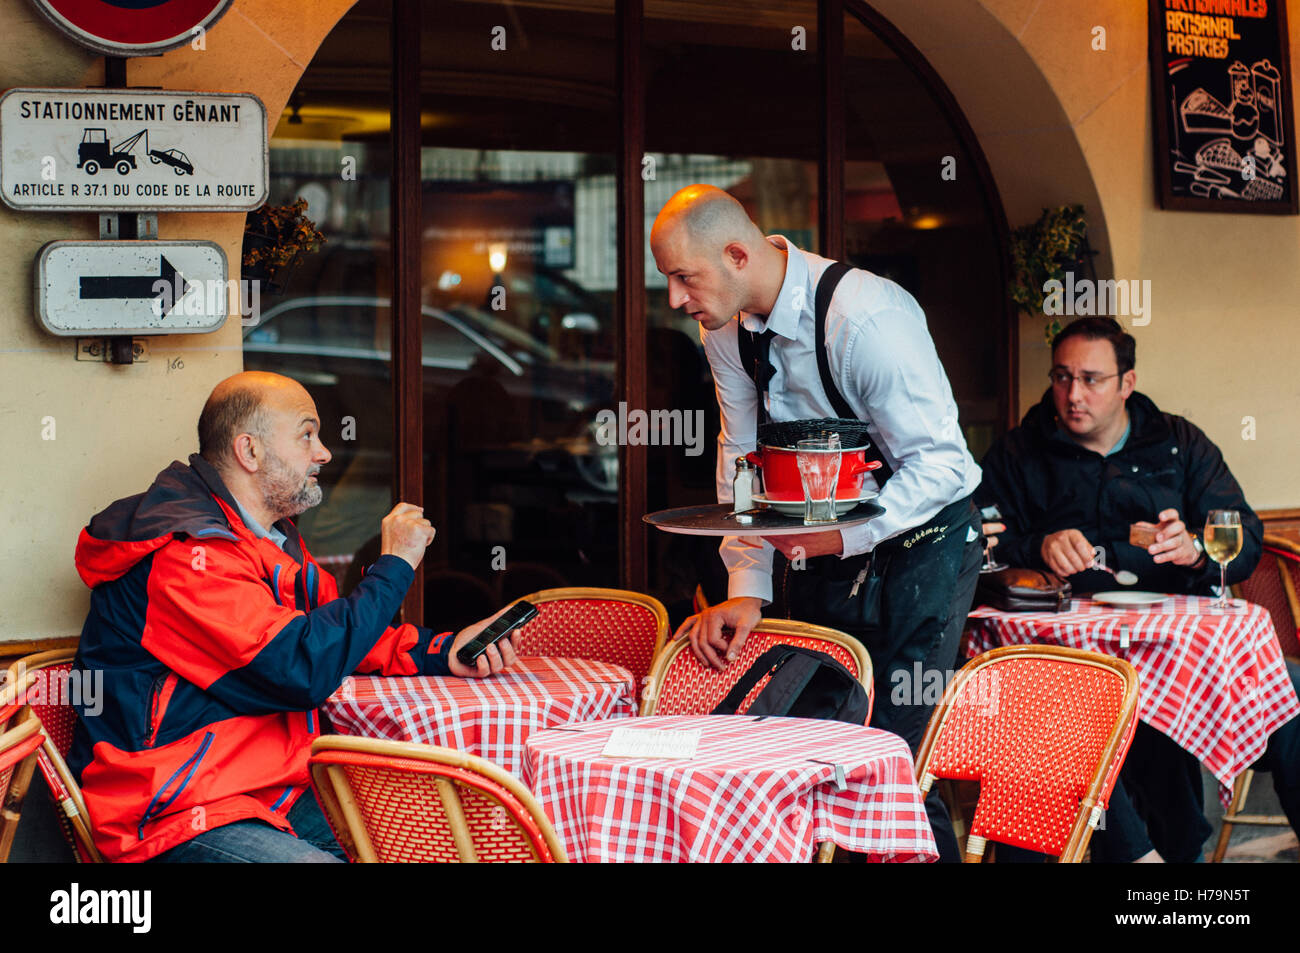 PARIS, FRANCE - NOVEMBER 4, 2015: Man talks with waiter at street cafe on November 4, 2015 in Montmartre. Waiter holds tray with Stock Photo